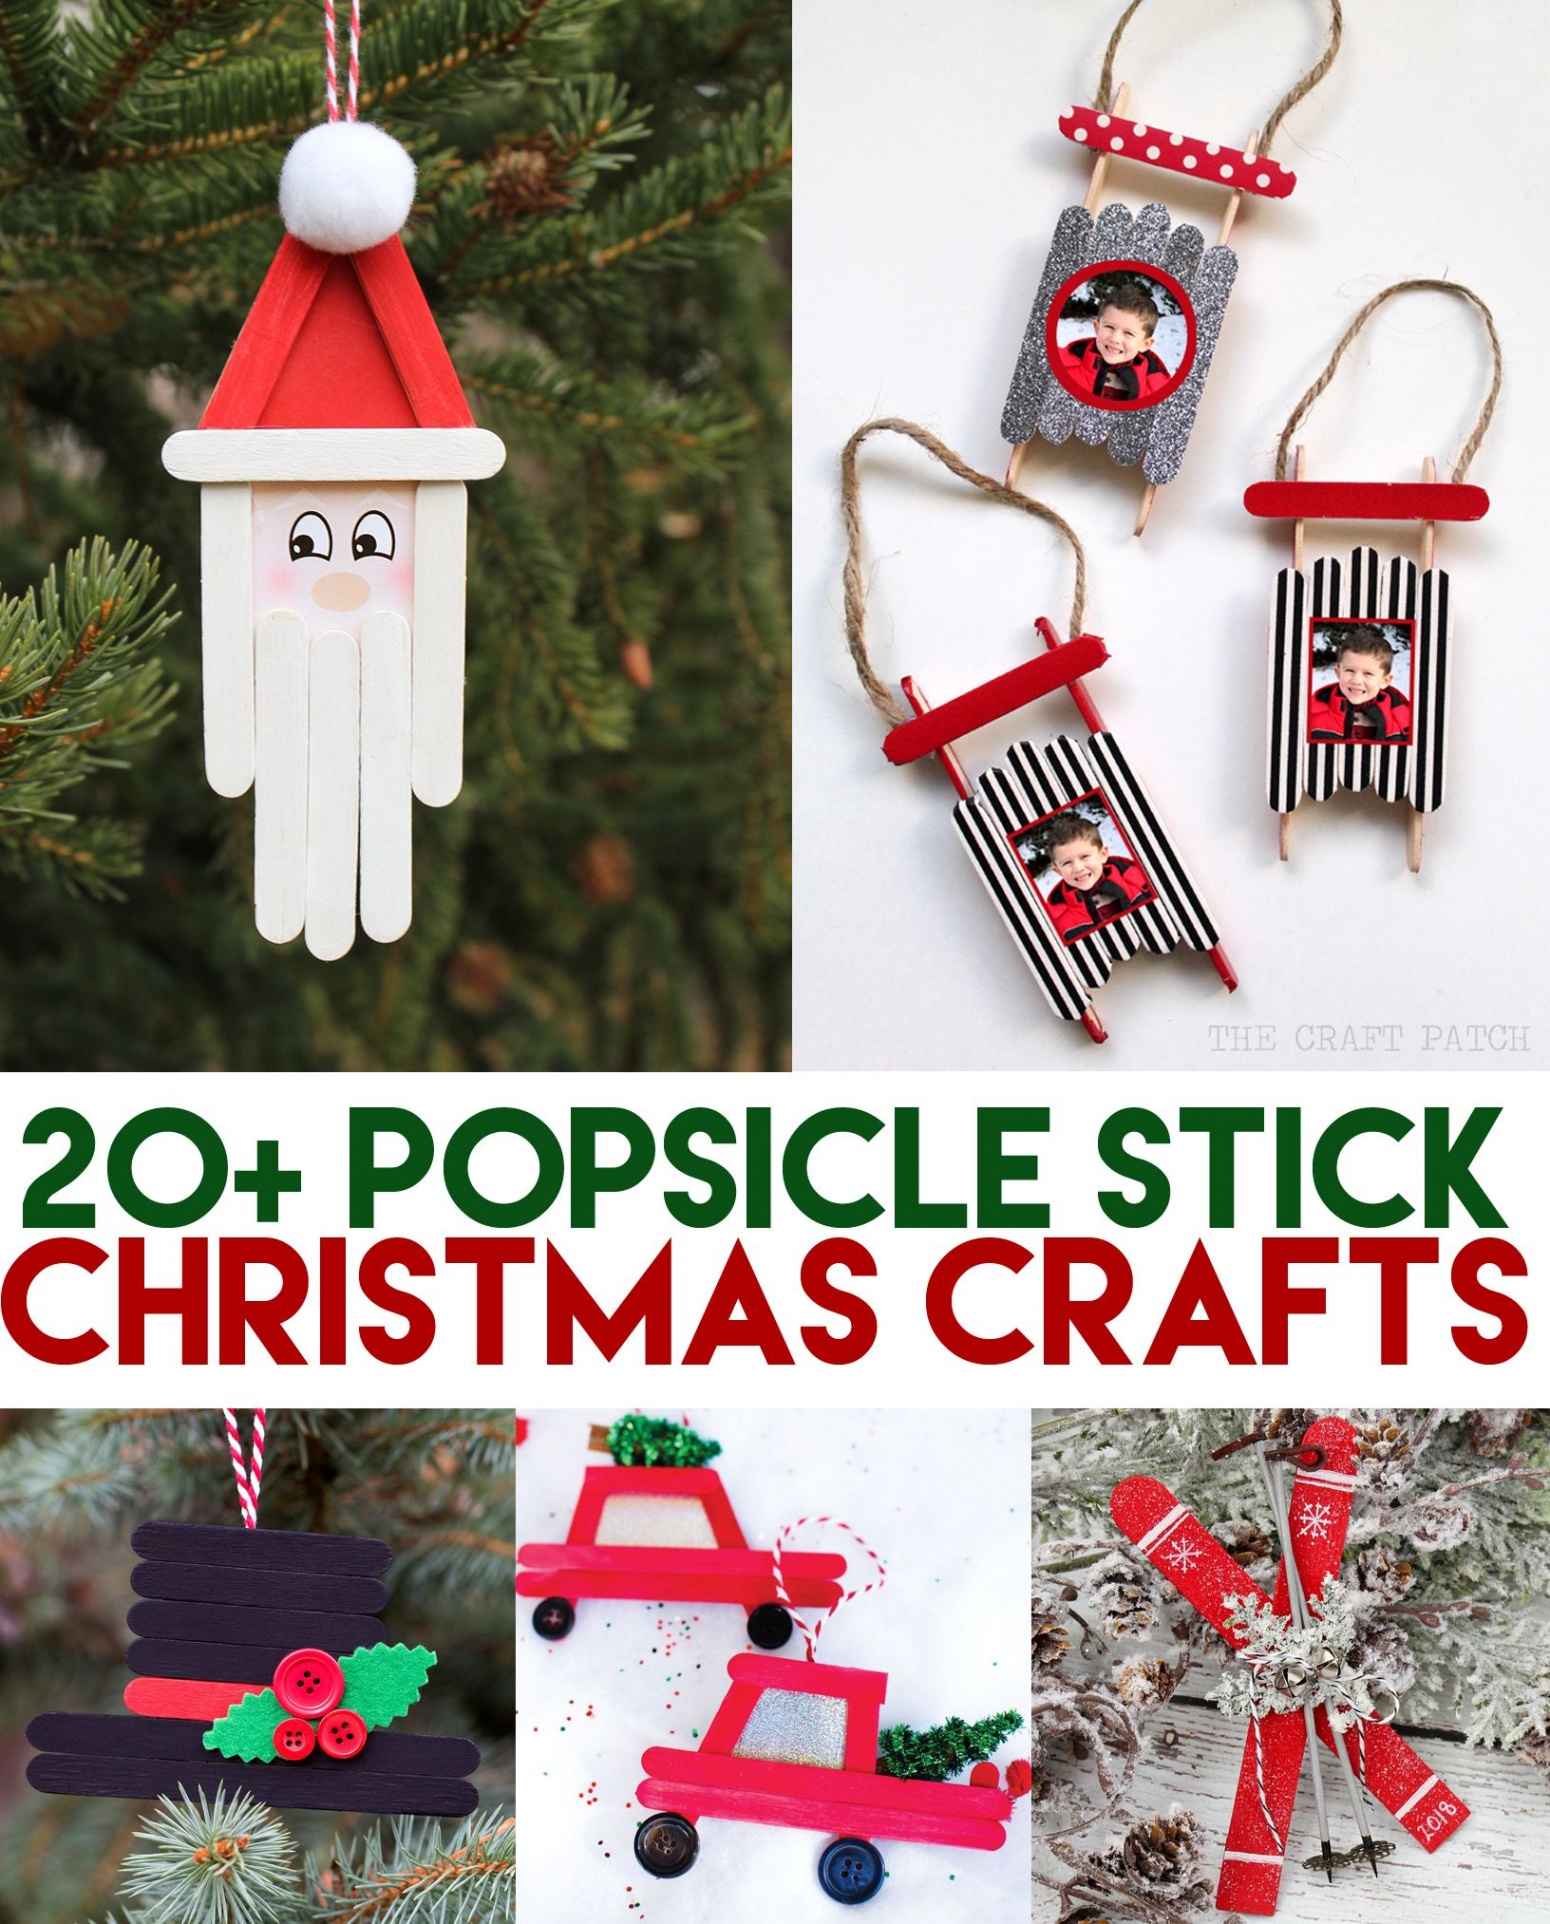 Creative and Fun Popsicle Stick Christmas Crafts for Kids